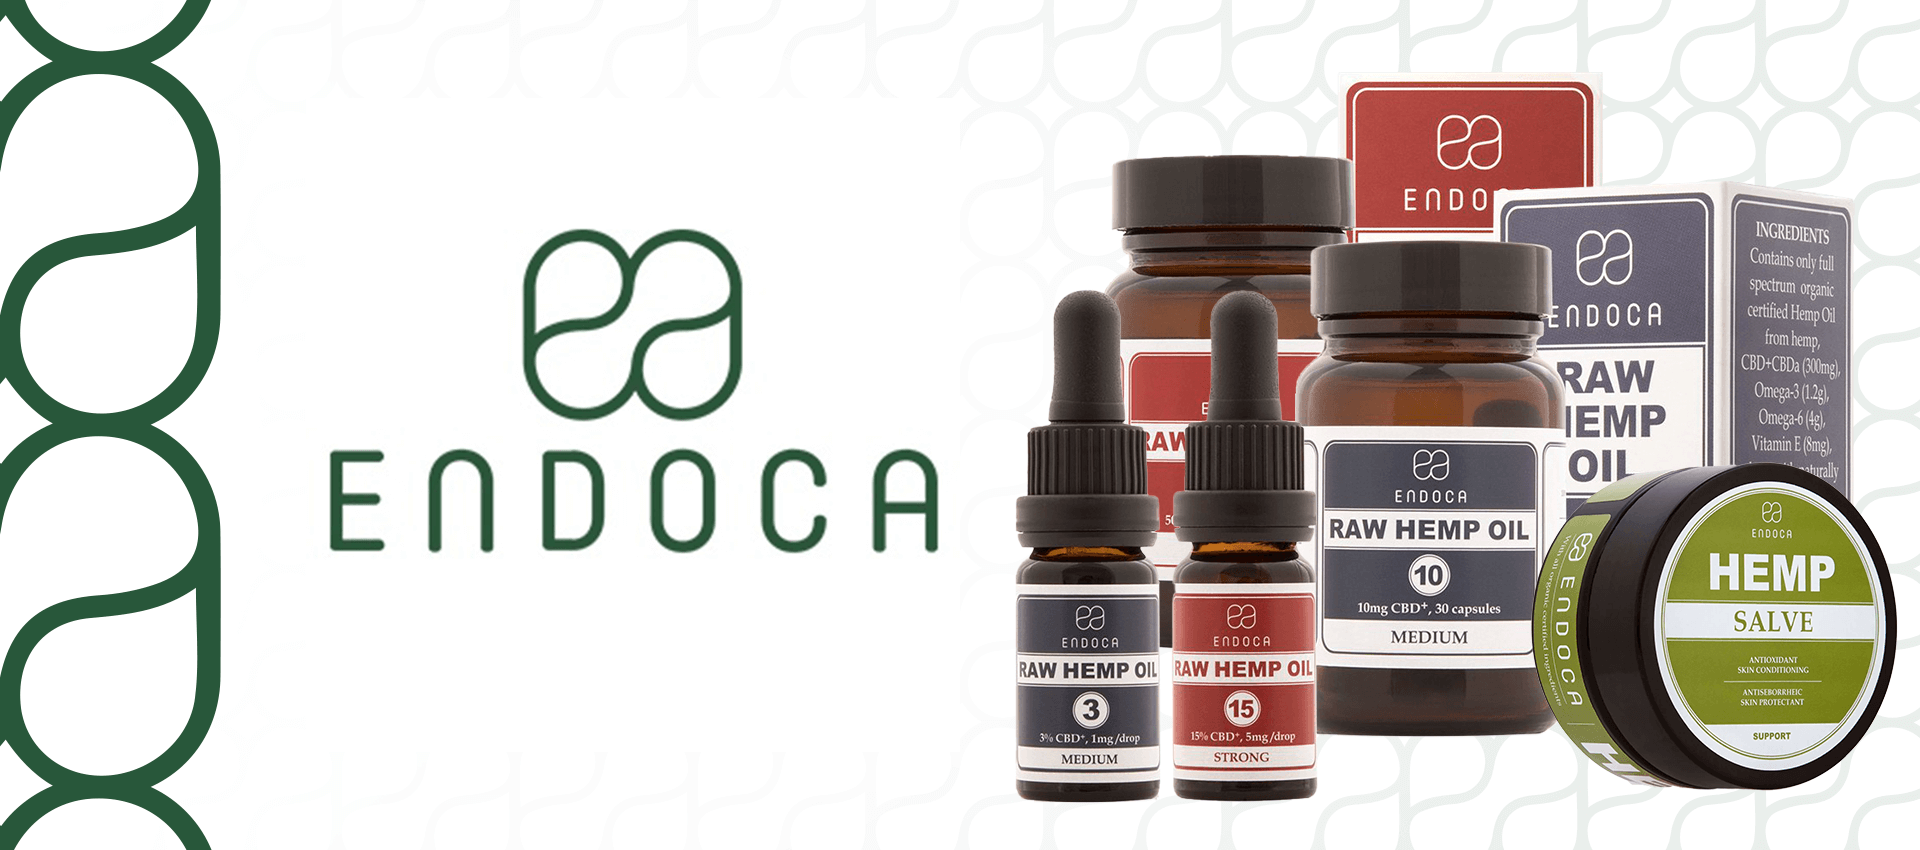 Endoca CBD All Products